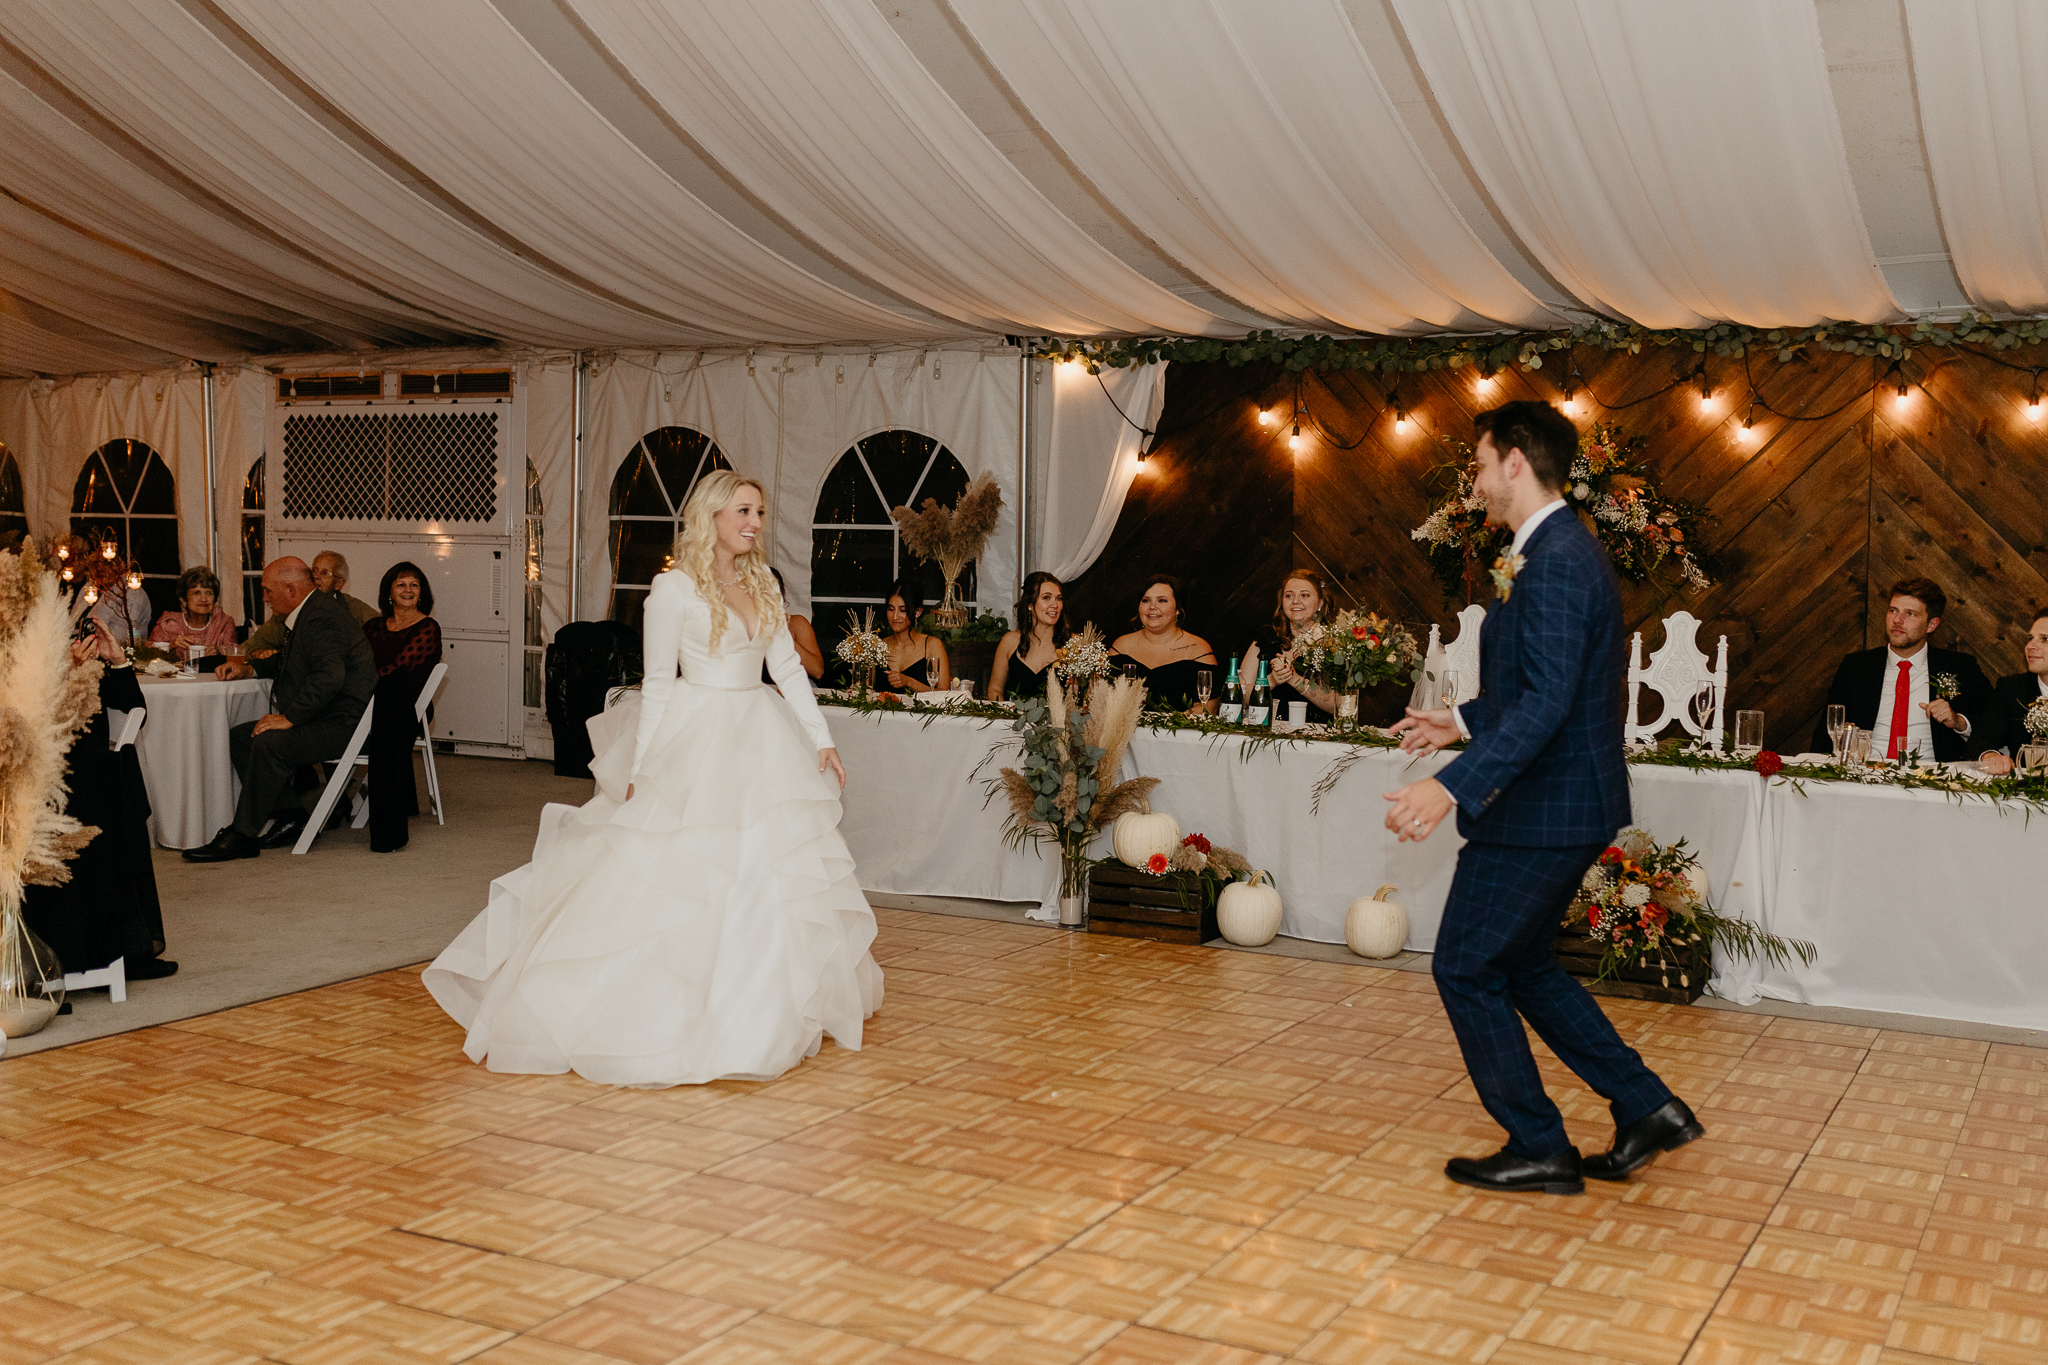 Bride and groom dancing together during their first dance, in a white tent wedding on a horse farm